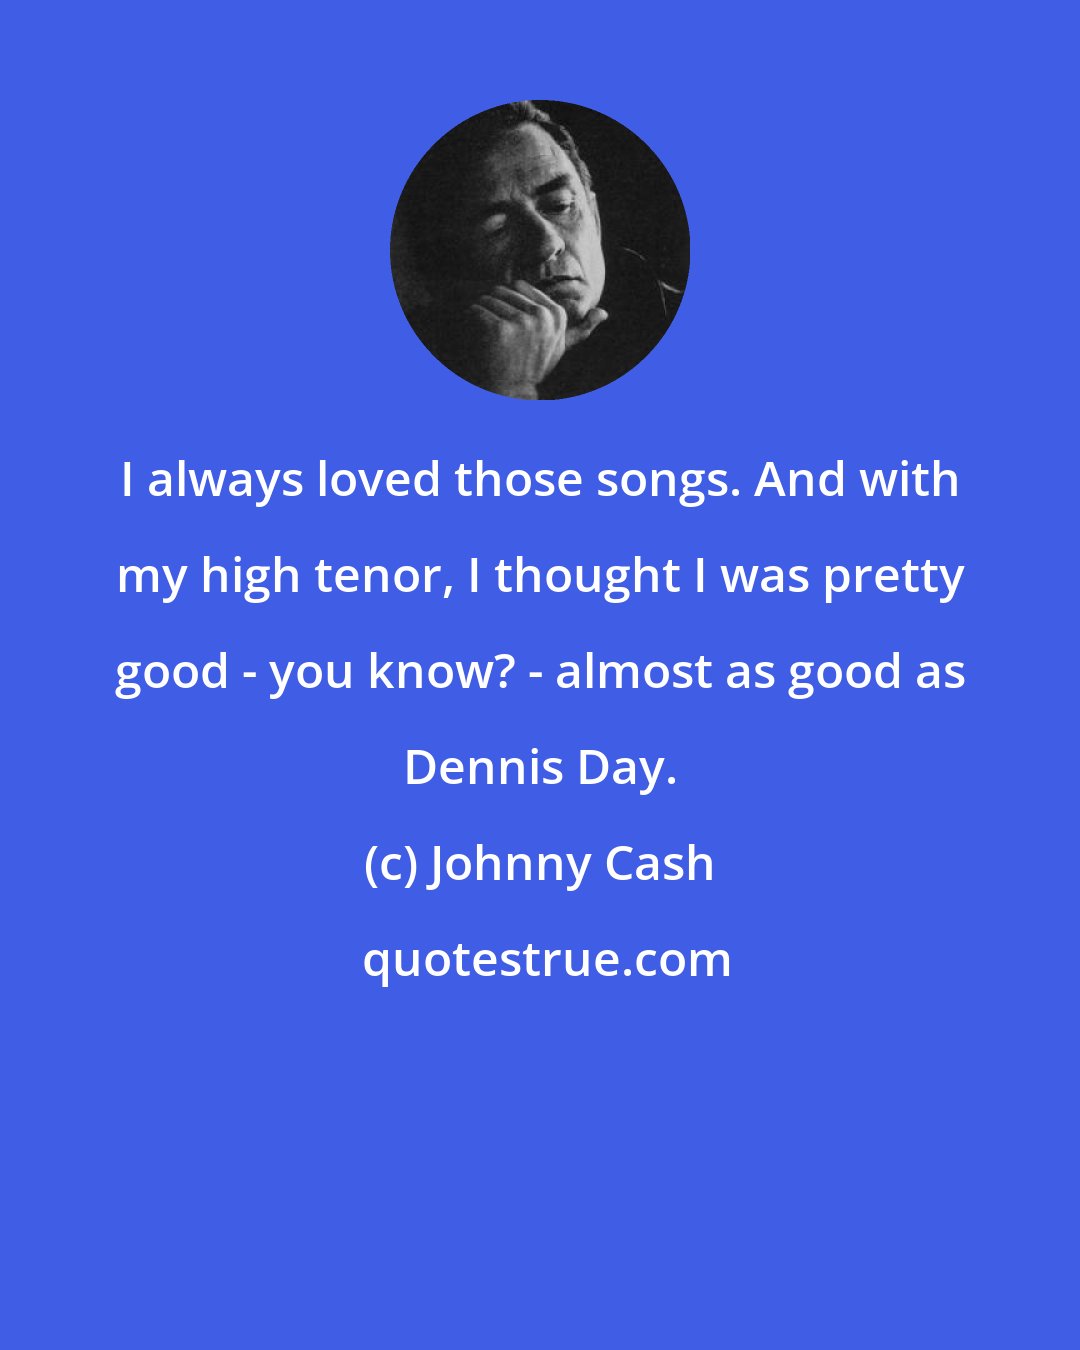 Johnny Cash: I always loved those songs. And with my high tenor, I thought I was pretty good - you know? - almost as good as Dennis Day.